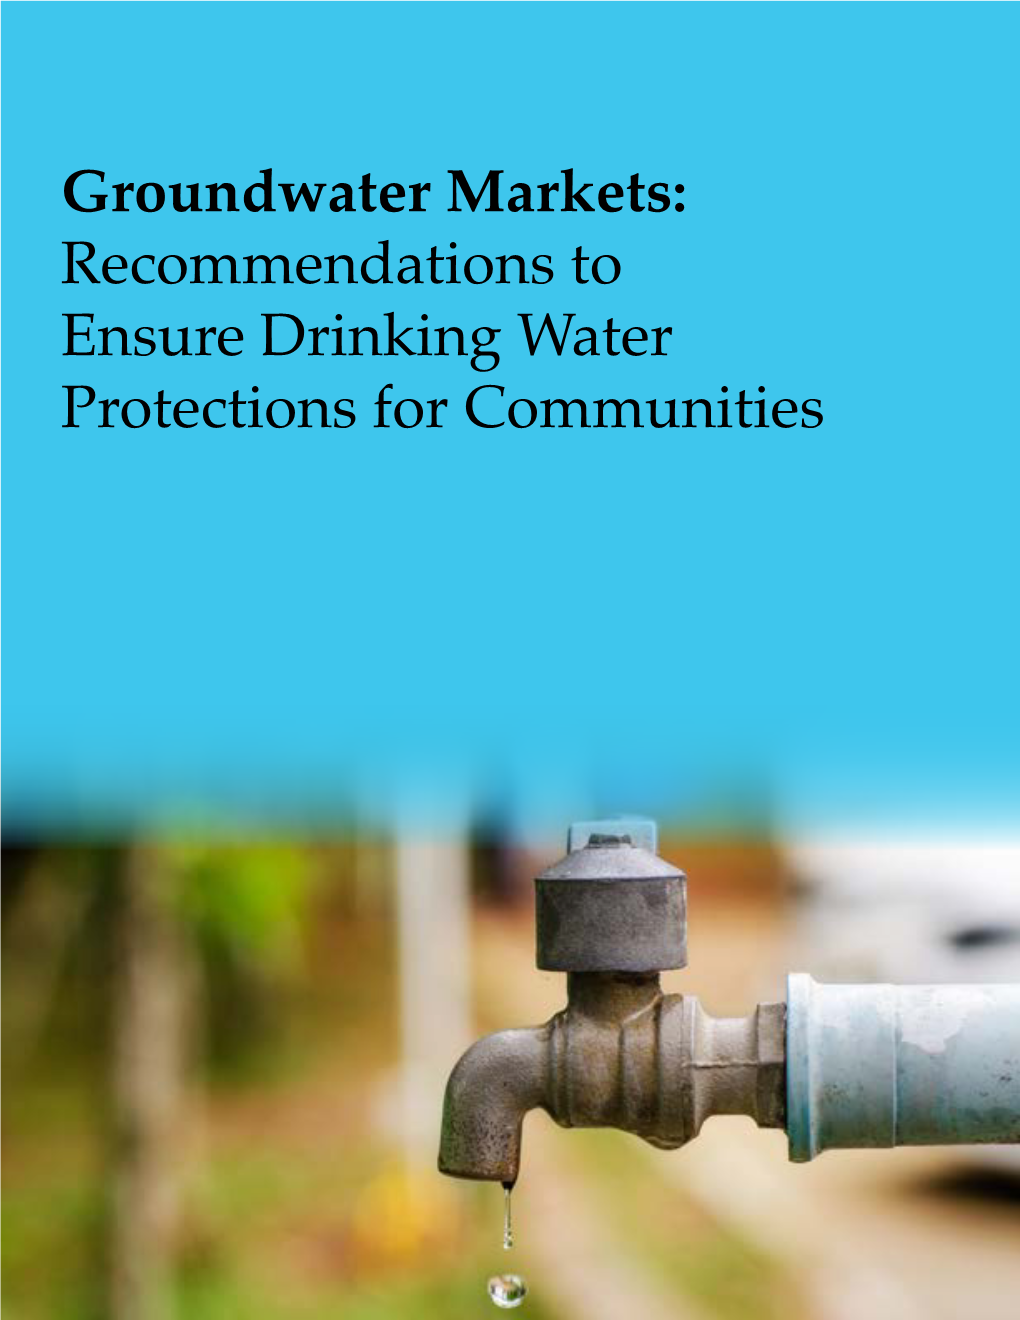 Recommendations to Ensure Drinking Water Protections for Communities ©CWC 2020